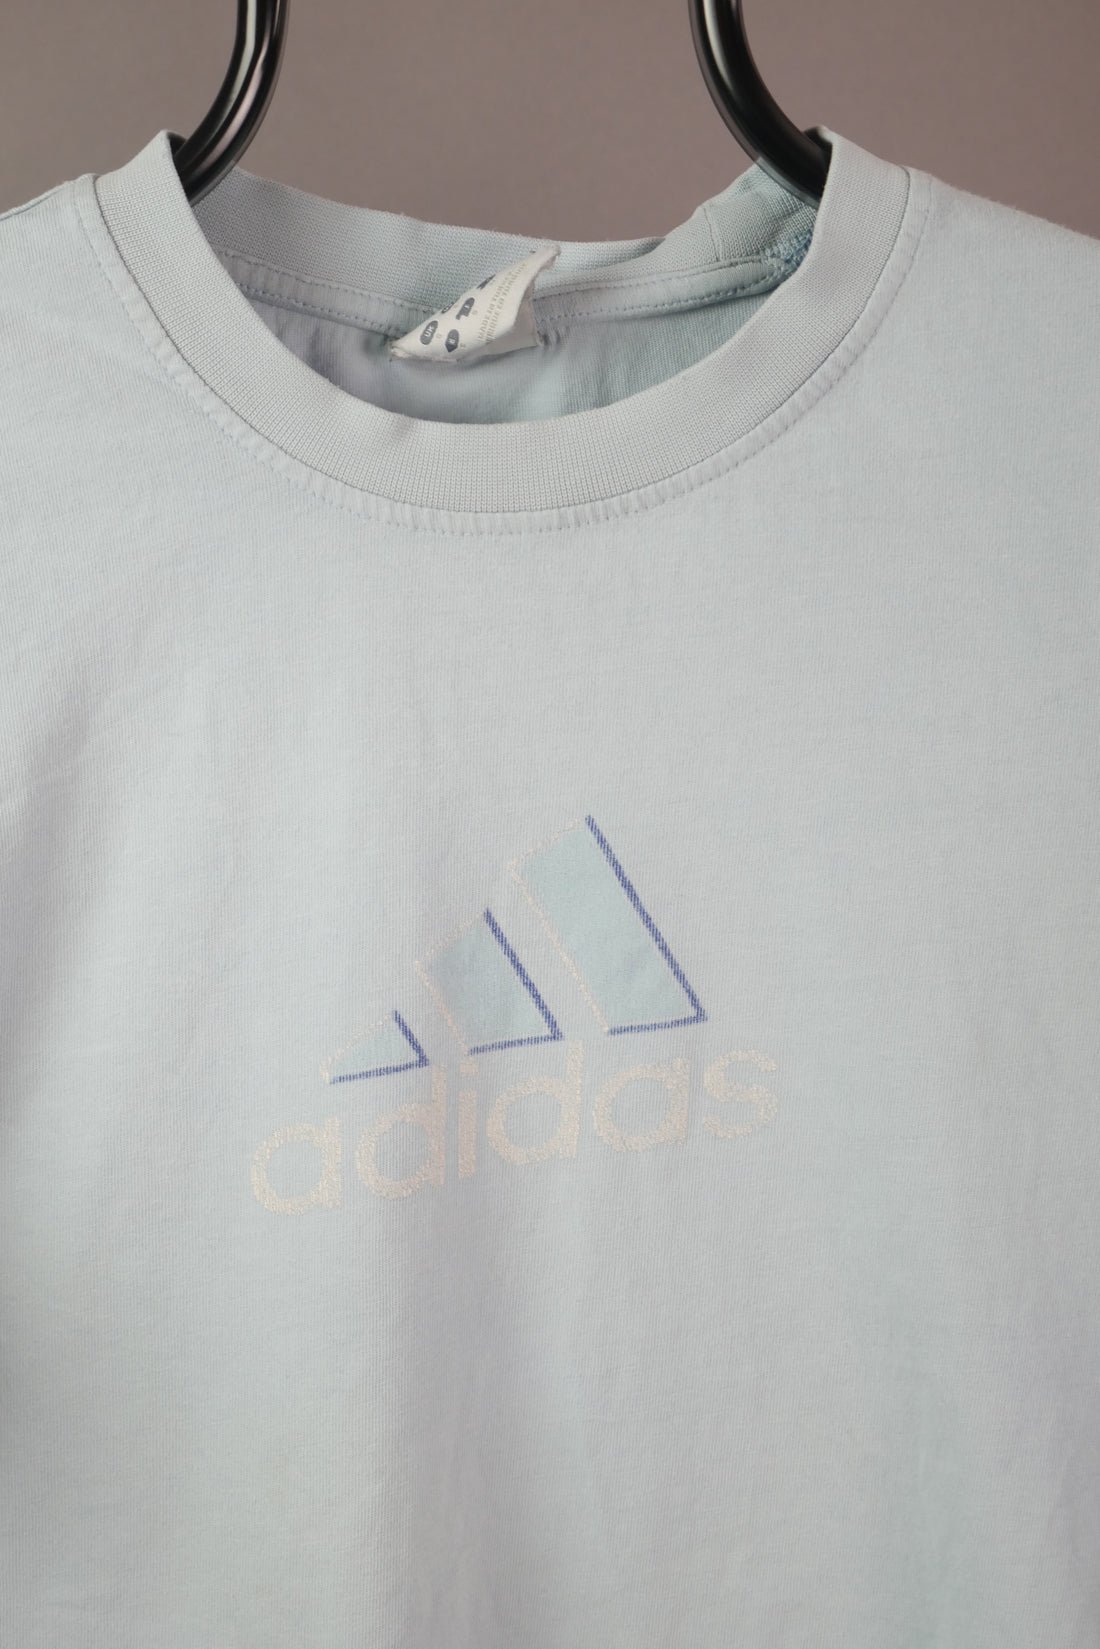 The Vintage Adidas Graphic T-Shirt (S)